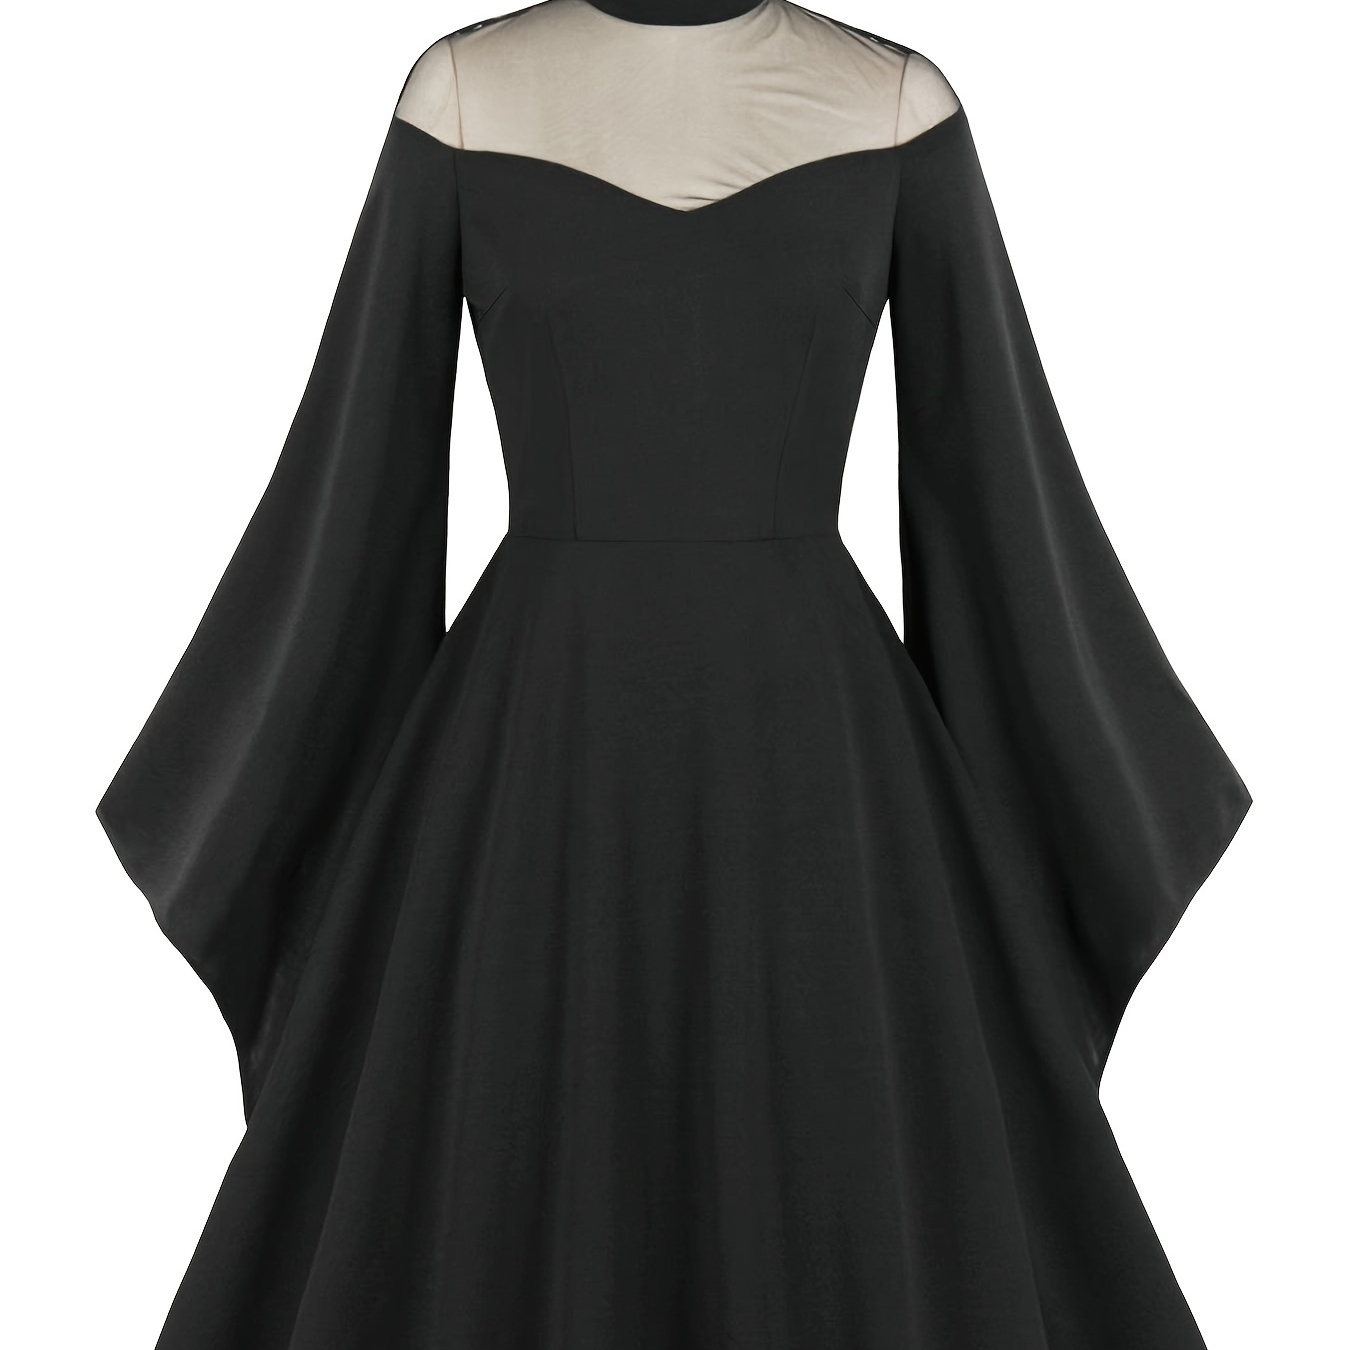 

Plus Size Halloween Gothic Dress, Women's Plus Contrast Mesh Bell Sleeve High Neck Swing Party Dress